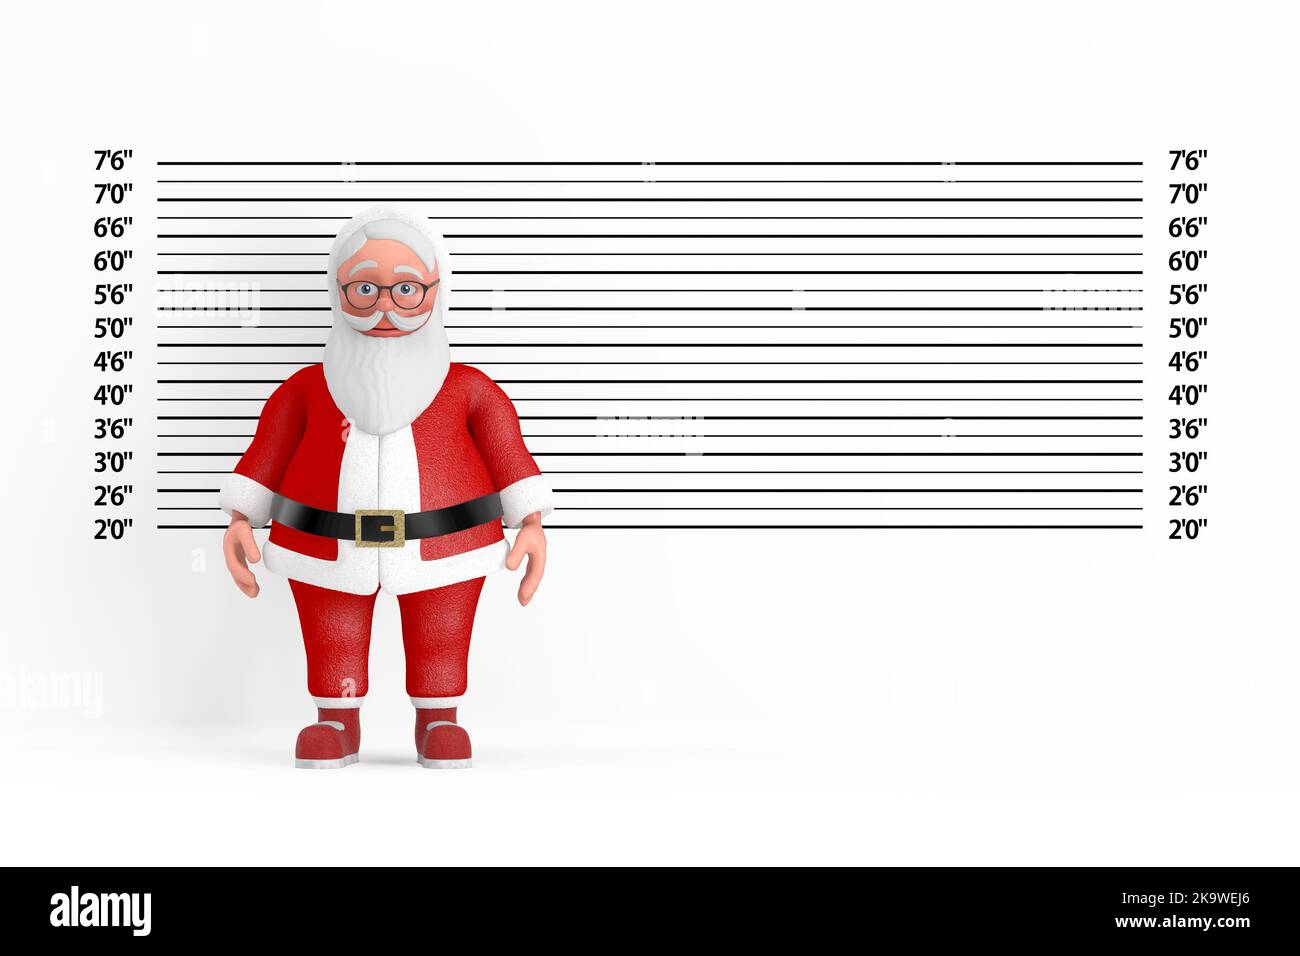 Cartoon Cheerful Santa Claus Granpa in front of Police Lineup or Mugshot Background extreme closeup. 3d Rendering Stock Photo